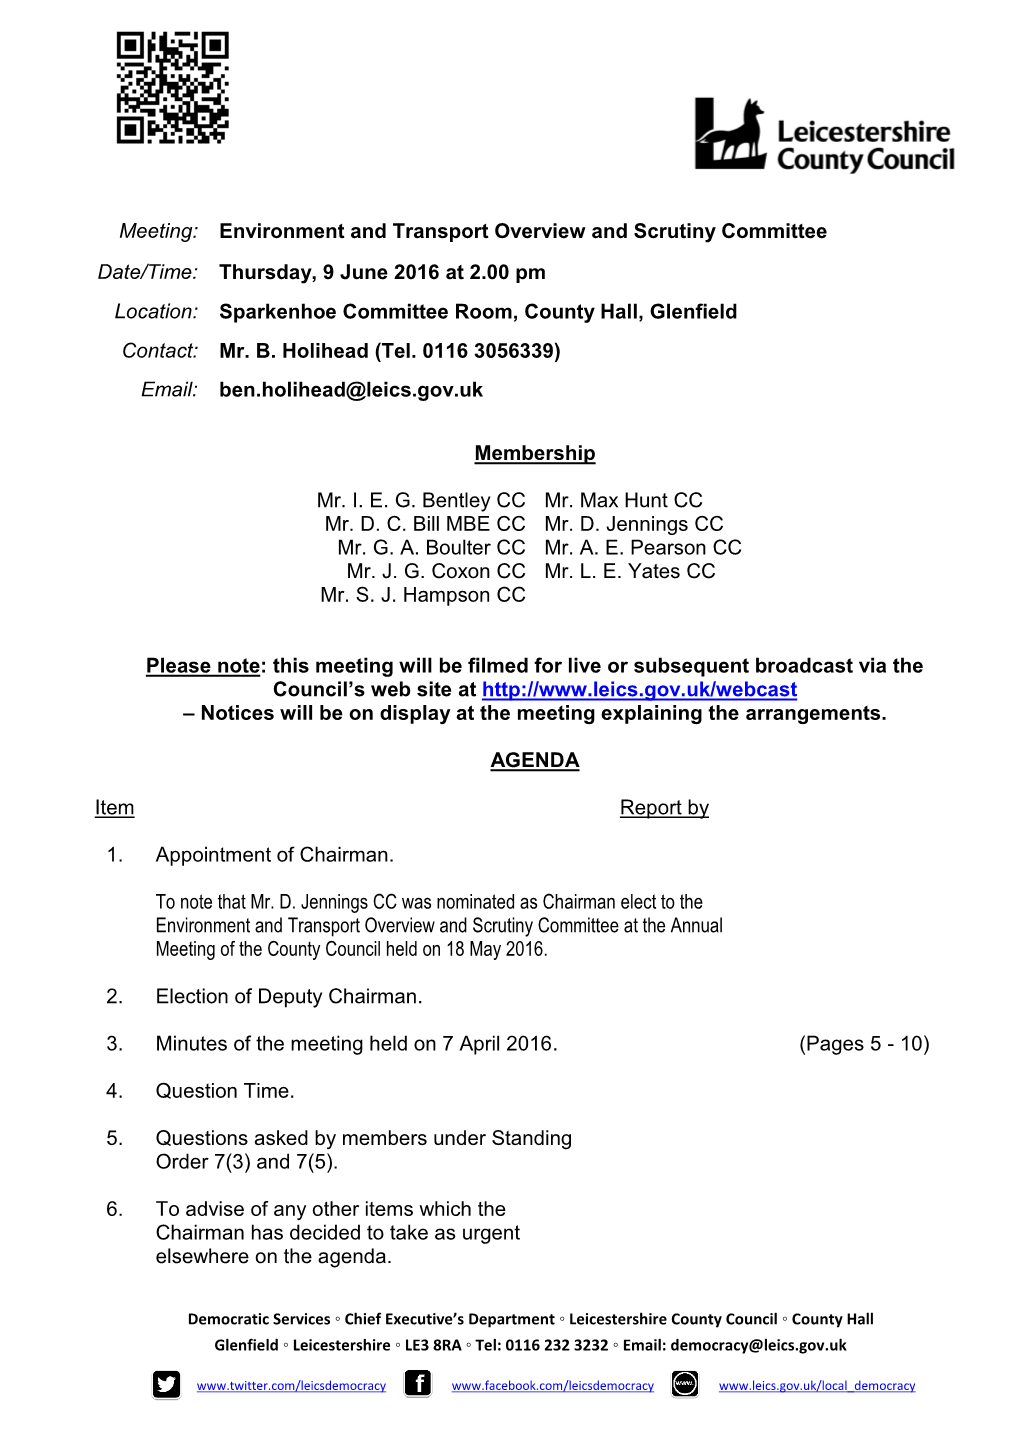 (Public Pack)Agenda Document for Environment and Transport Overview and Scrutiny Committee, 09/06/2016 14:00